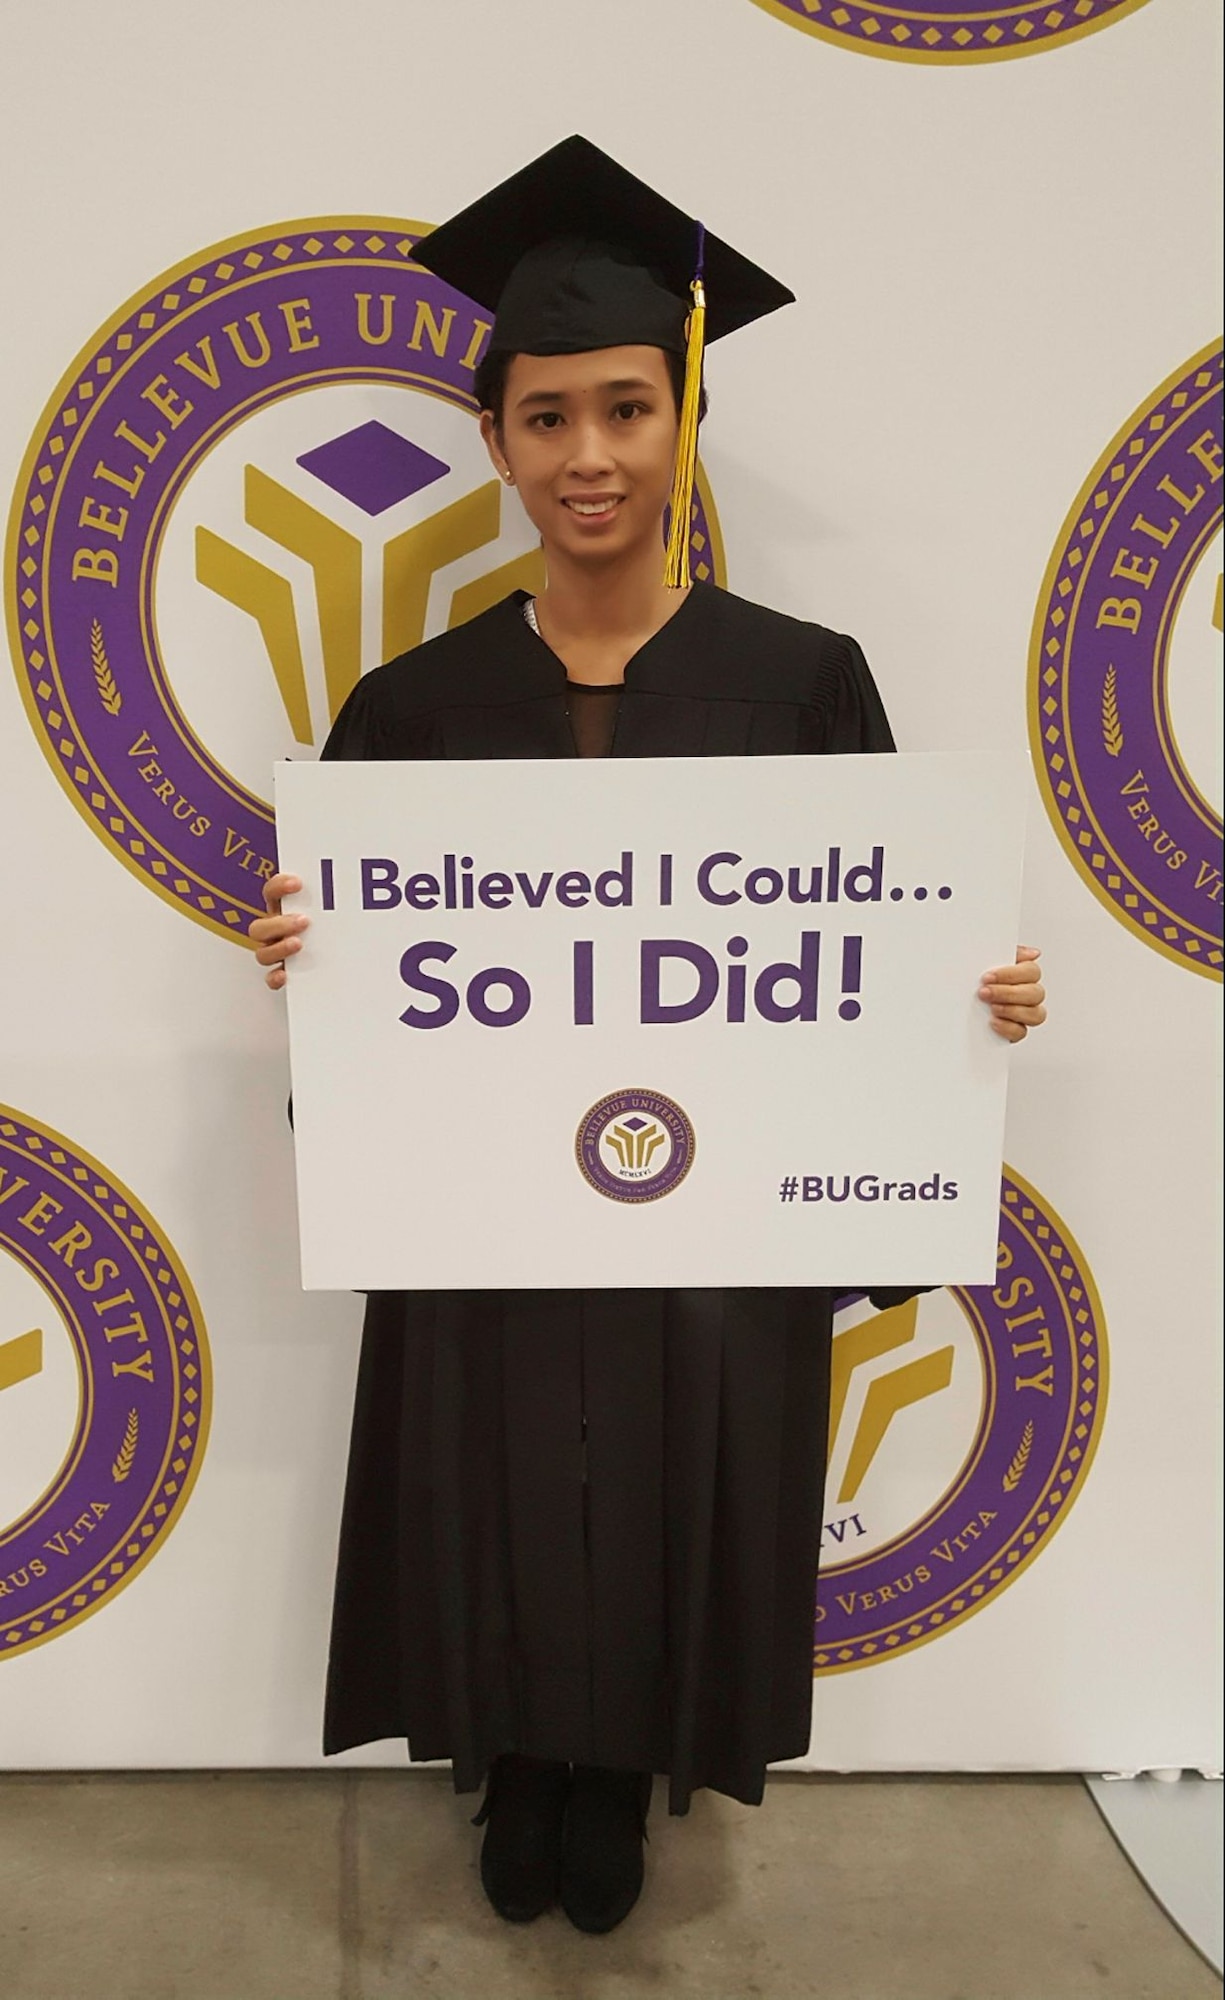 Graduate in robes holds a sign that reads "I believed I could so I did!"